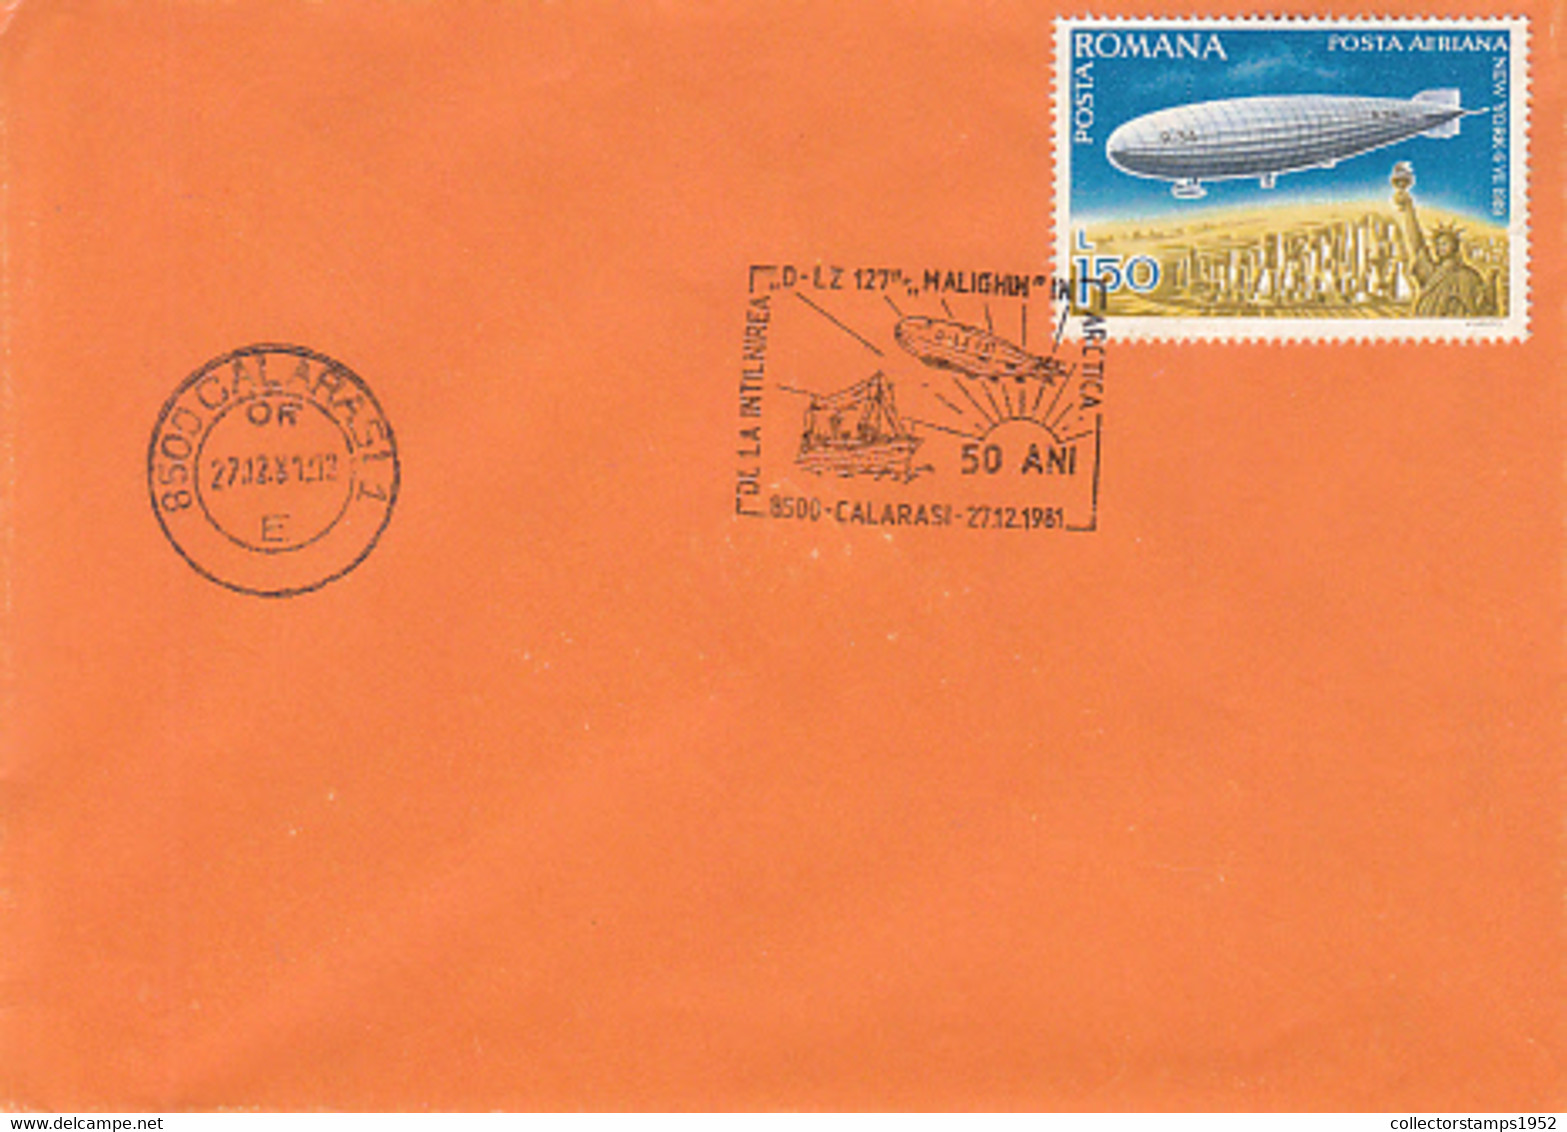 96245- ZEPPELIN LZ-127 MEETING MALIGHIN ICEBREAKER IN ARCTICA, SPECIAL POSTMARK ON COVER, ZEPPELIN STAMP, 1981, ROMANIA - Other Means Of Transport